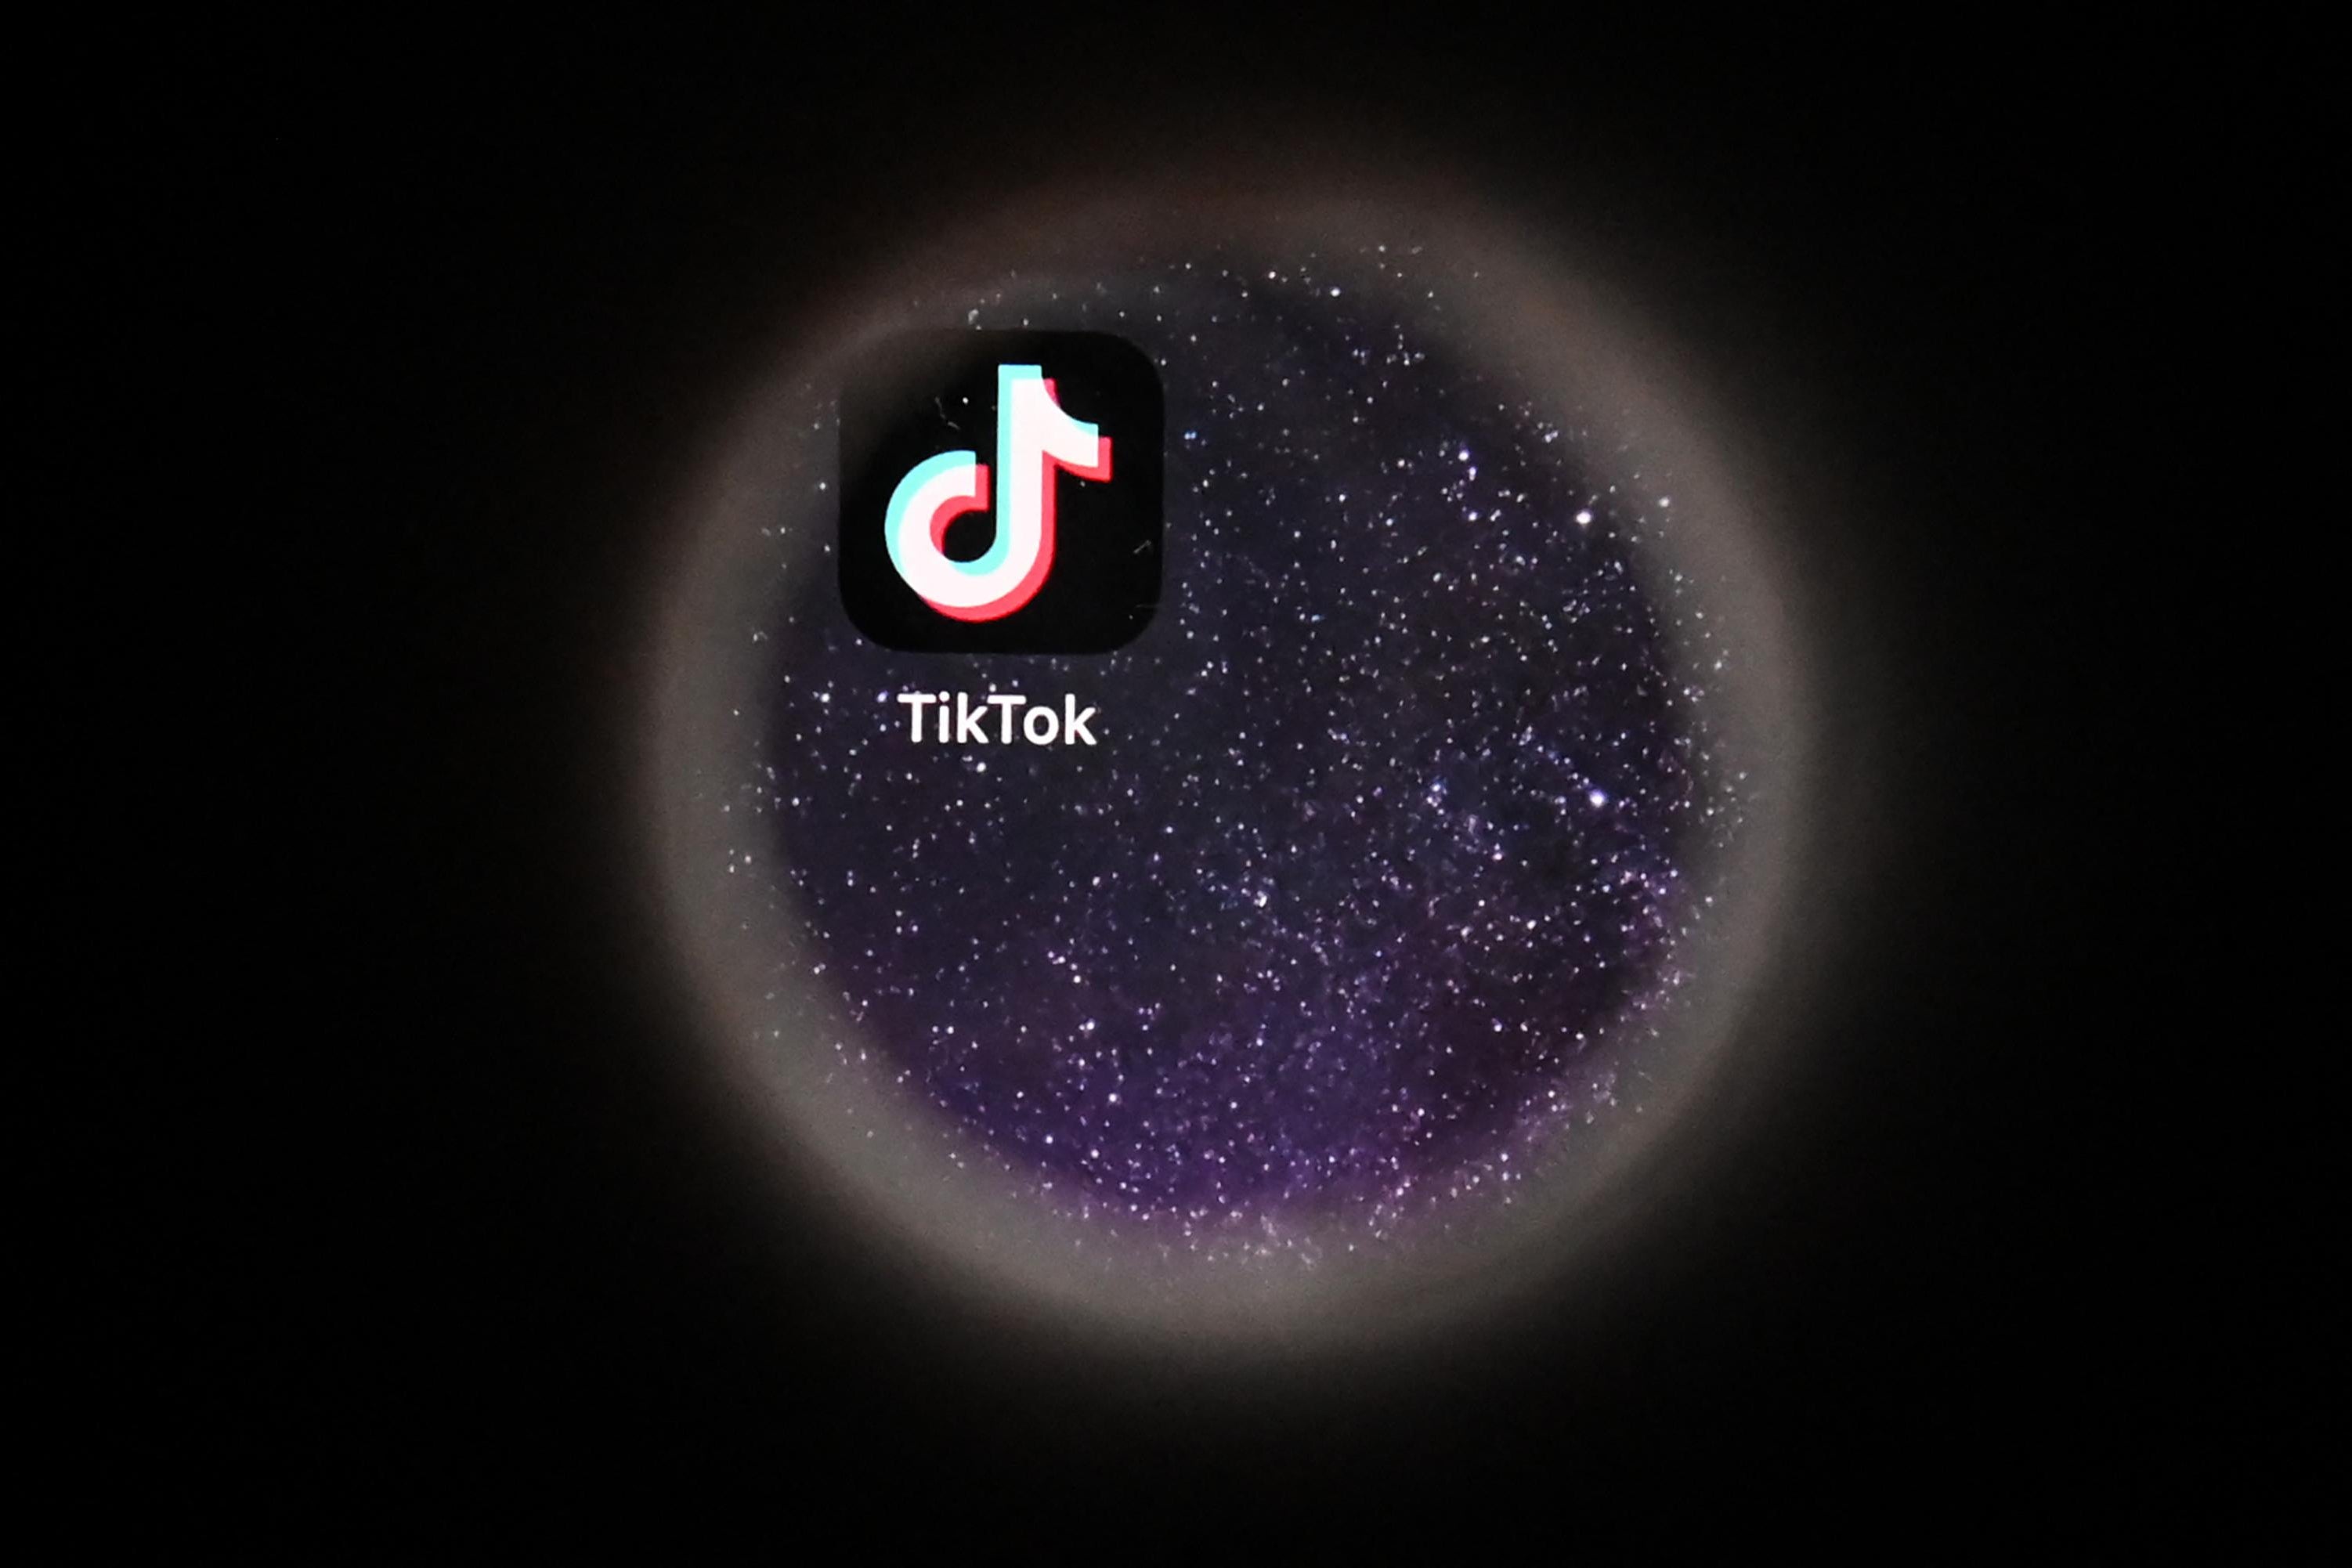 The TikTok logo, displayed against a starry background, is viewed through a circular lens.